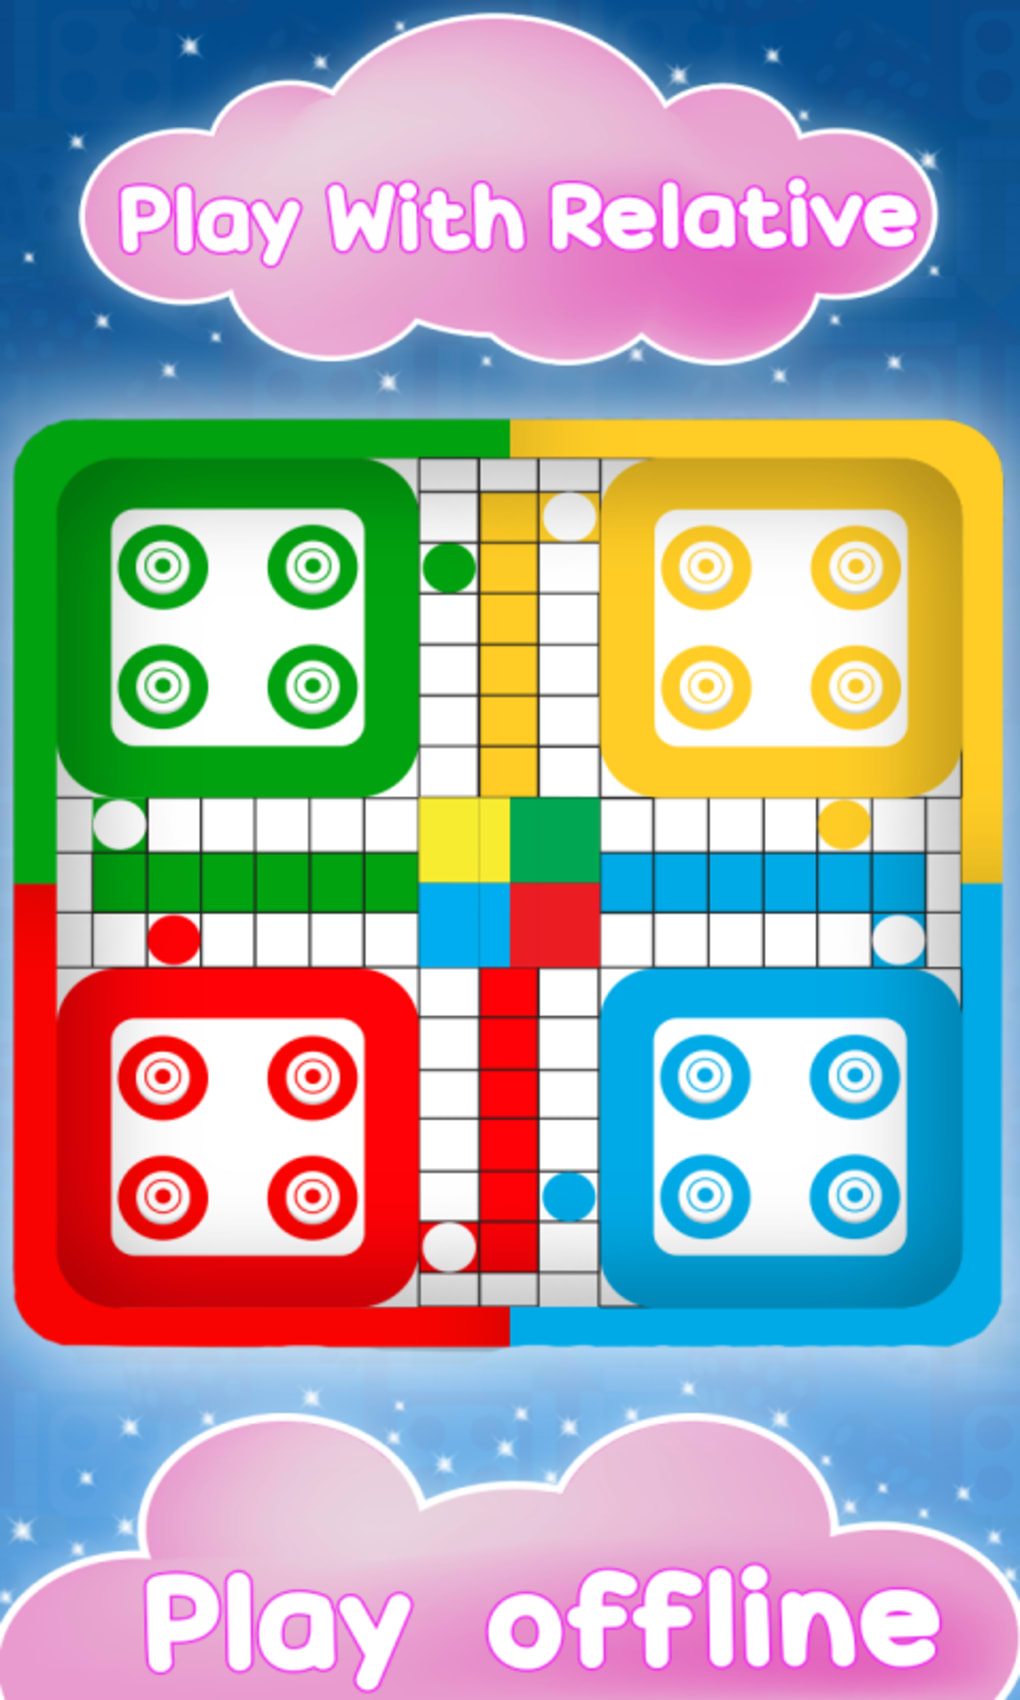 Stream Ludo King APK Download for iPad: Experience the Thrill of the Royal  Game of Parchisi by Lustloterra